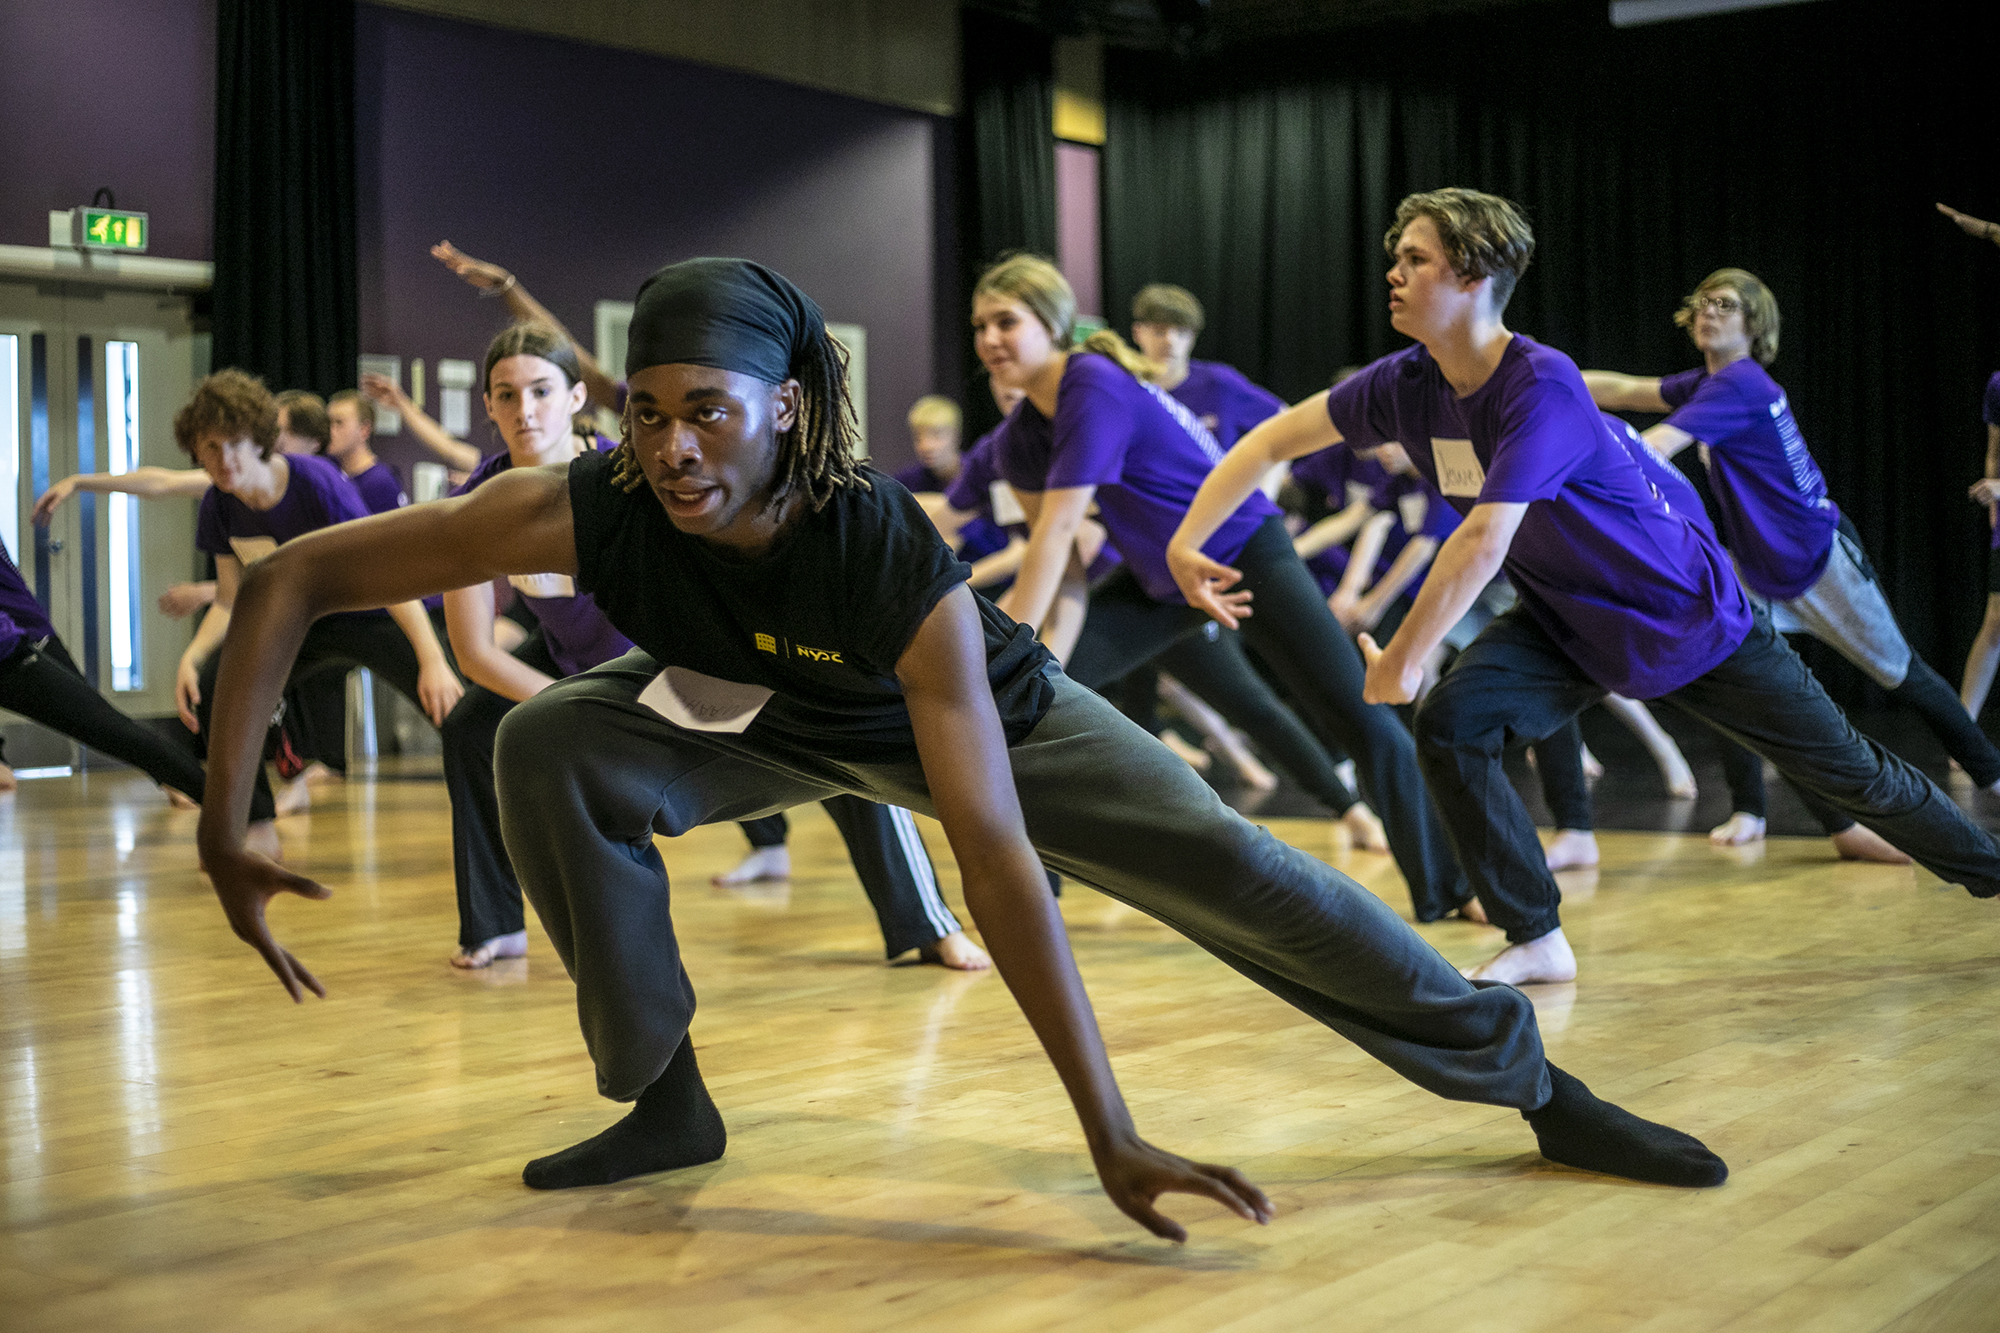 black male dance artist teaching room of young people, teacher and students in deep lunges with one hand touching the floor the other in a wing shape. Teacher wearing black students out of focus wearing purple t-shirts. 